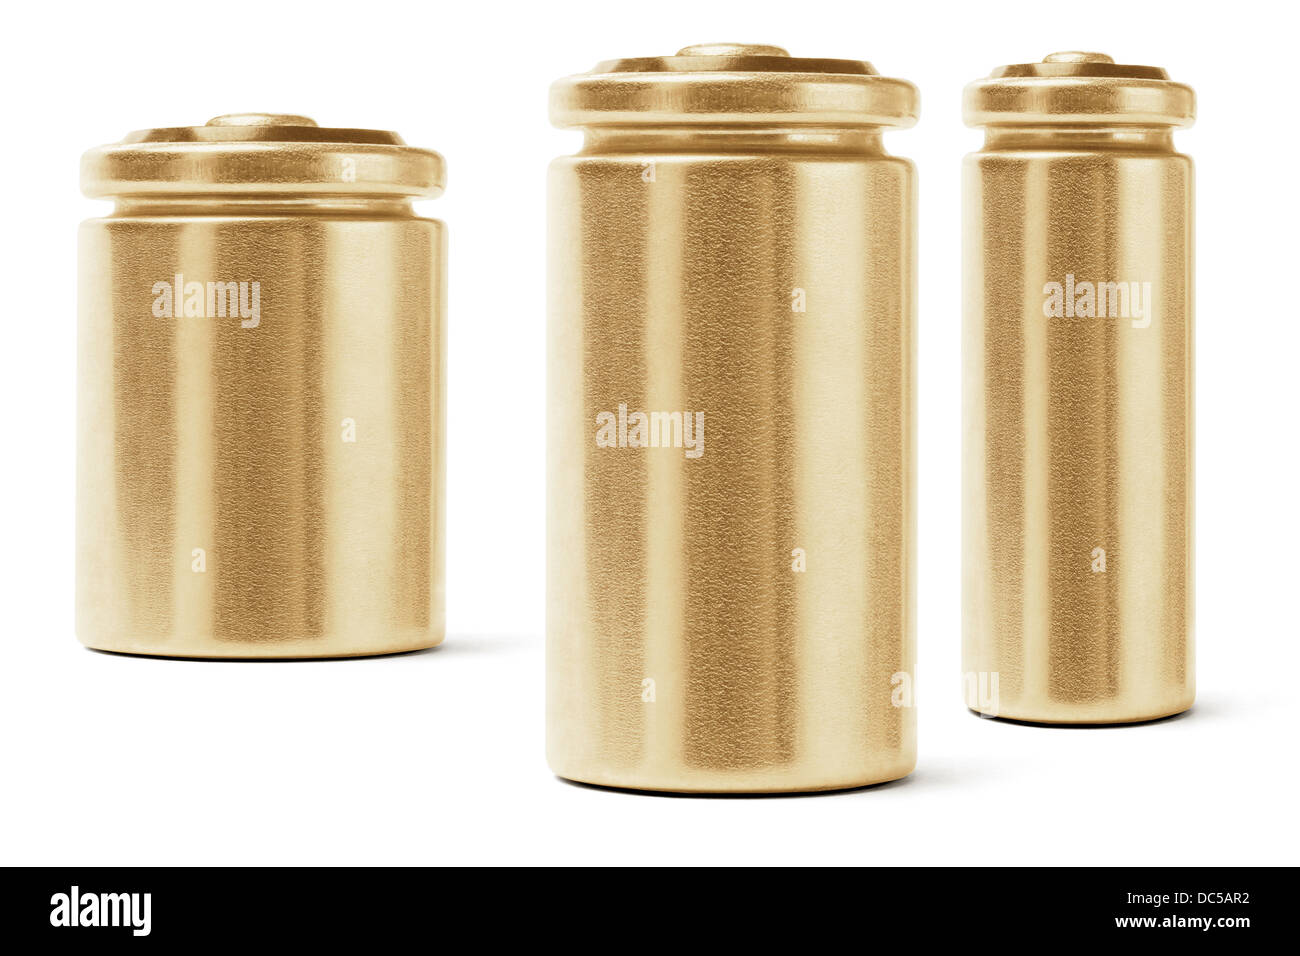 Three Gold Color Batteries On White Background Stock Photo